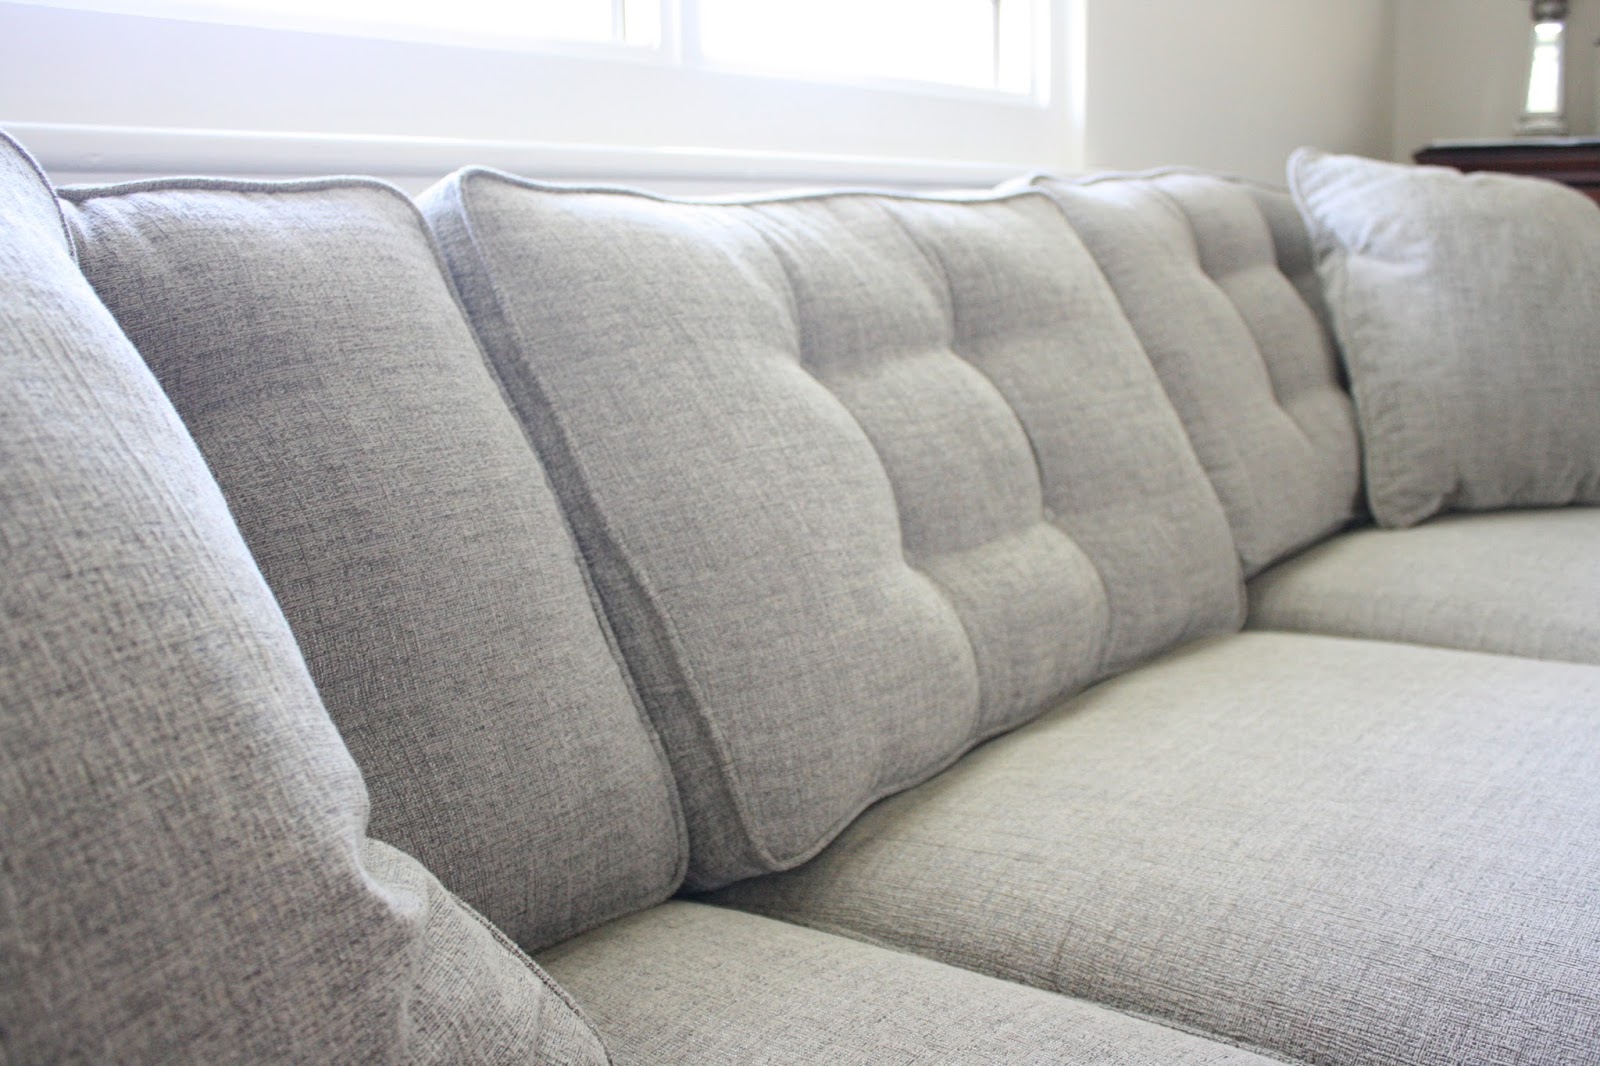 Aly S Bloggity Blog New Couch